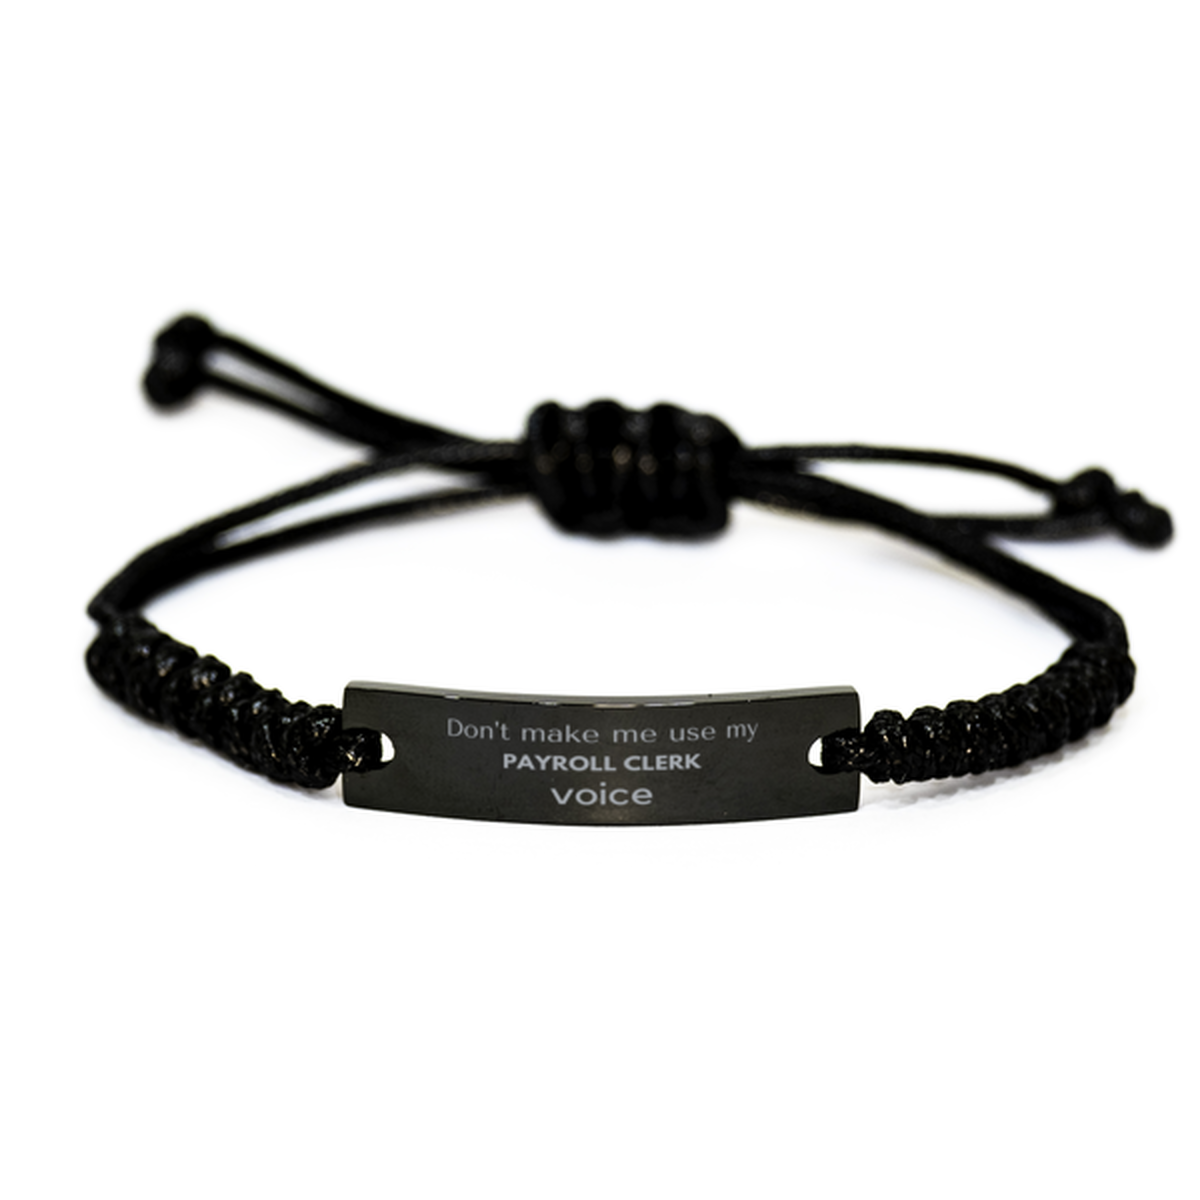 Don't make me use my Payroll Clerk voice, Sarcasm Payroll Clerk Gifts, Christmas Payroll Clerk Black Rope Bracelet Birthday Unique Gifts For Payroll Clerk Coworkers, Men, Women, Colleague, Friends